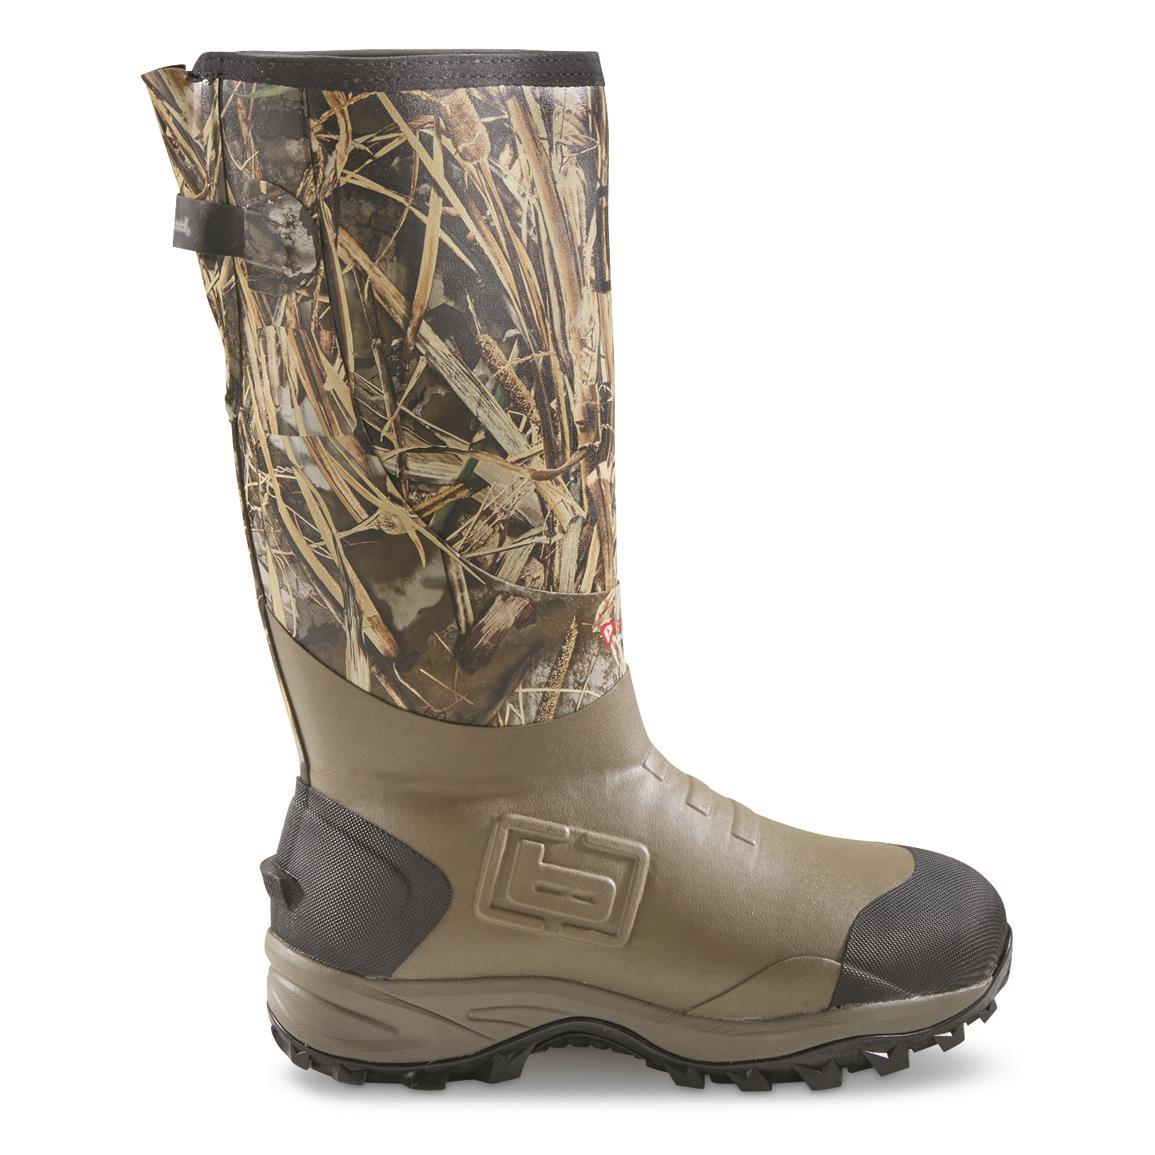 Gator Waders Women's Omega Insulated Boots - Realtree Max 5 10